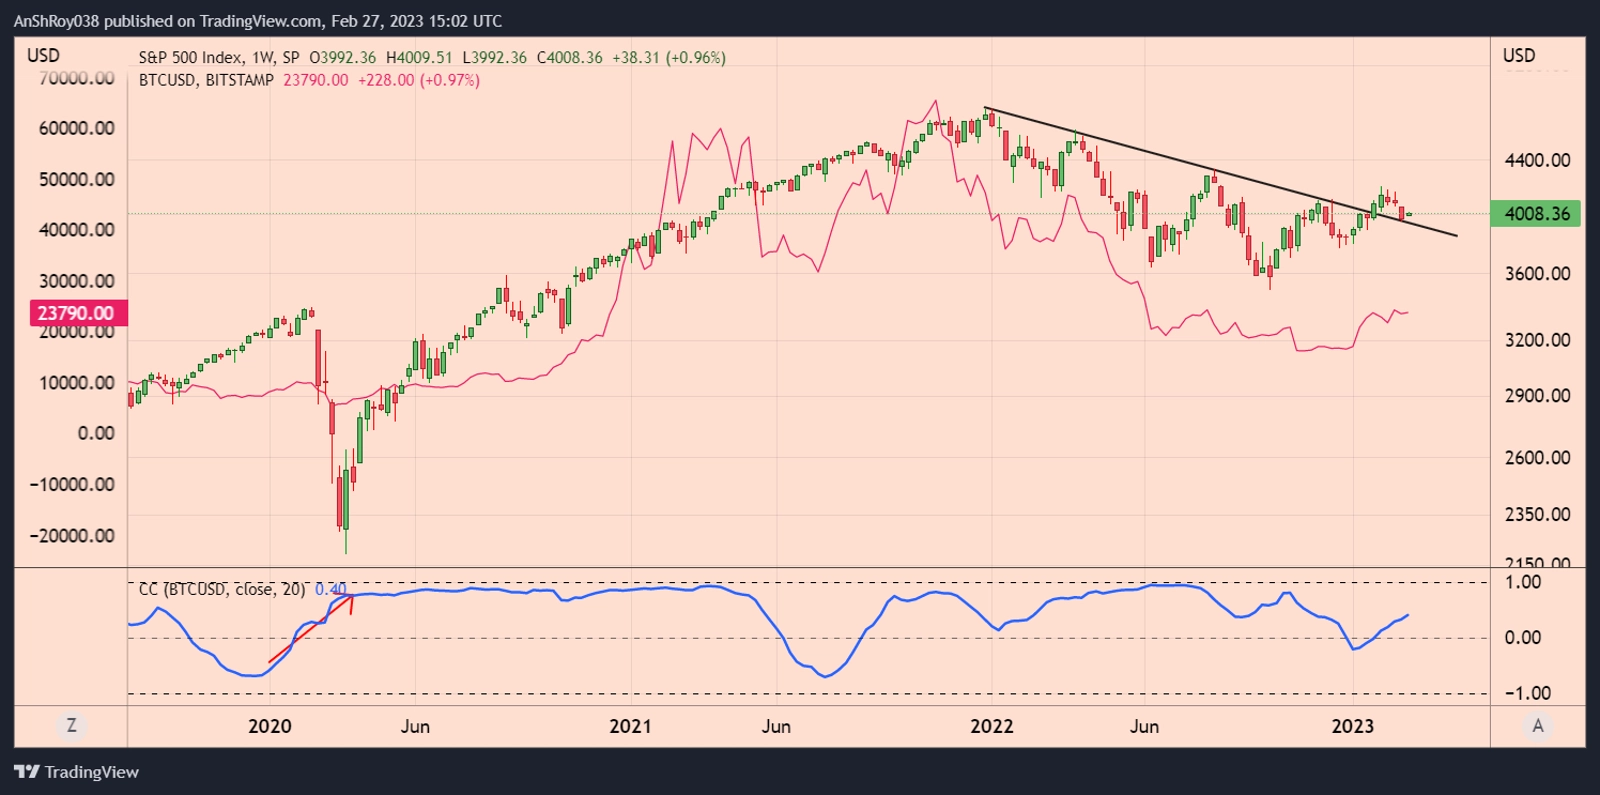 SPX weekly chart with BTCUSD and Correlation Coefficient